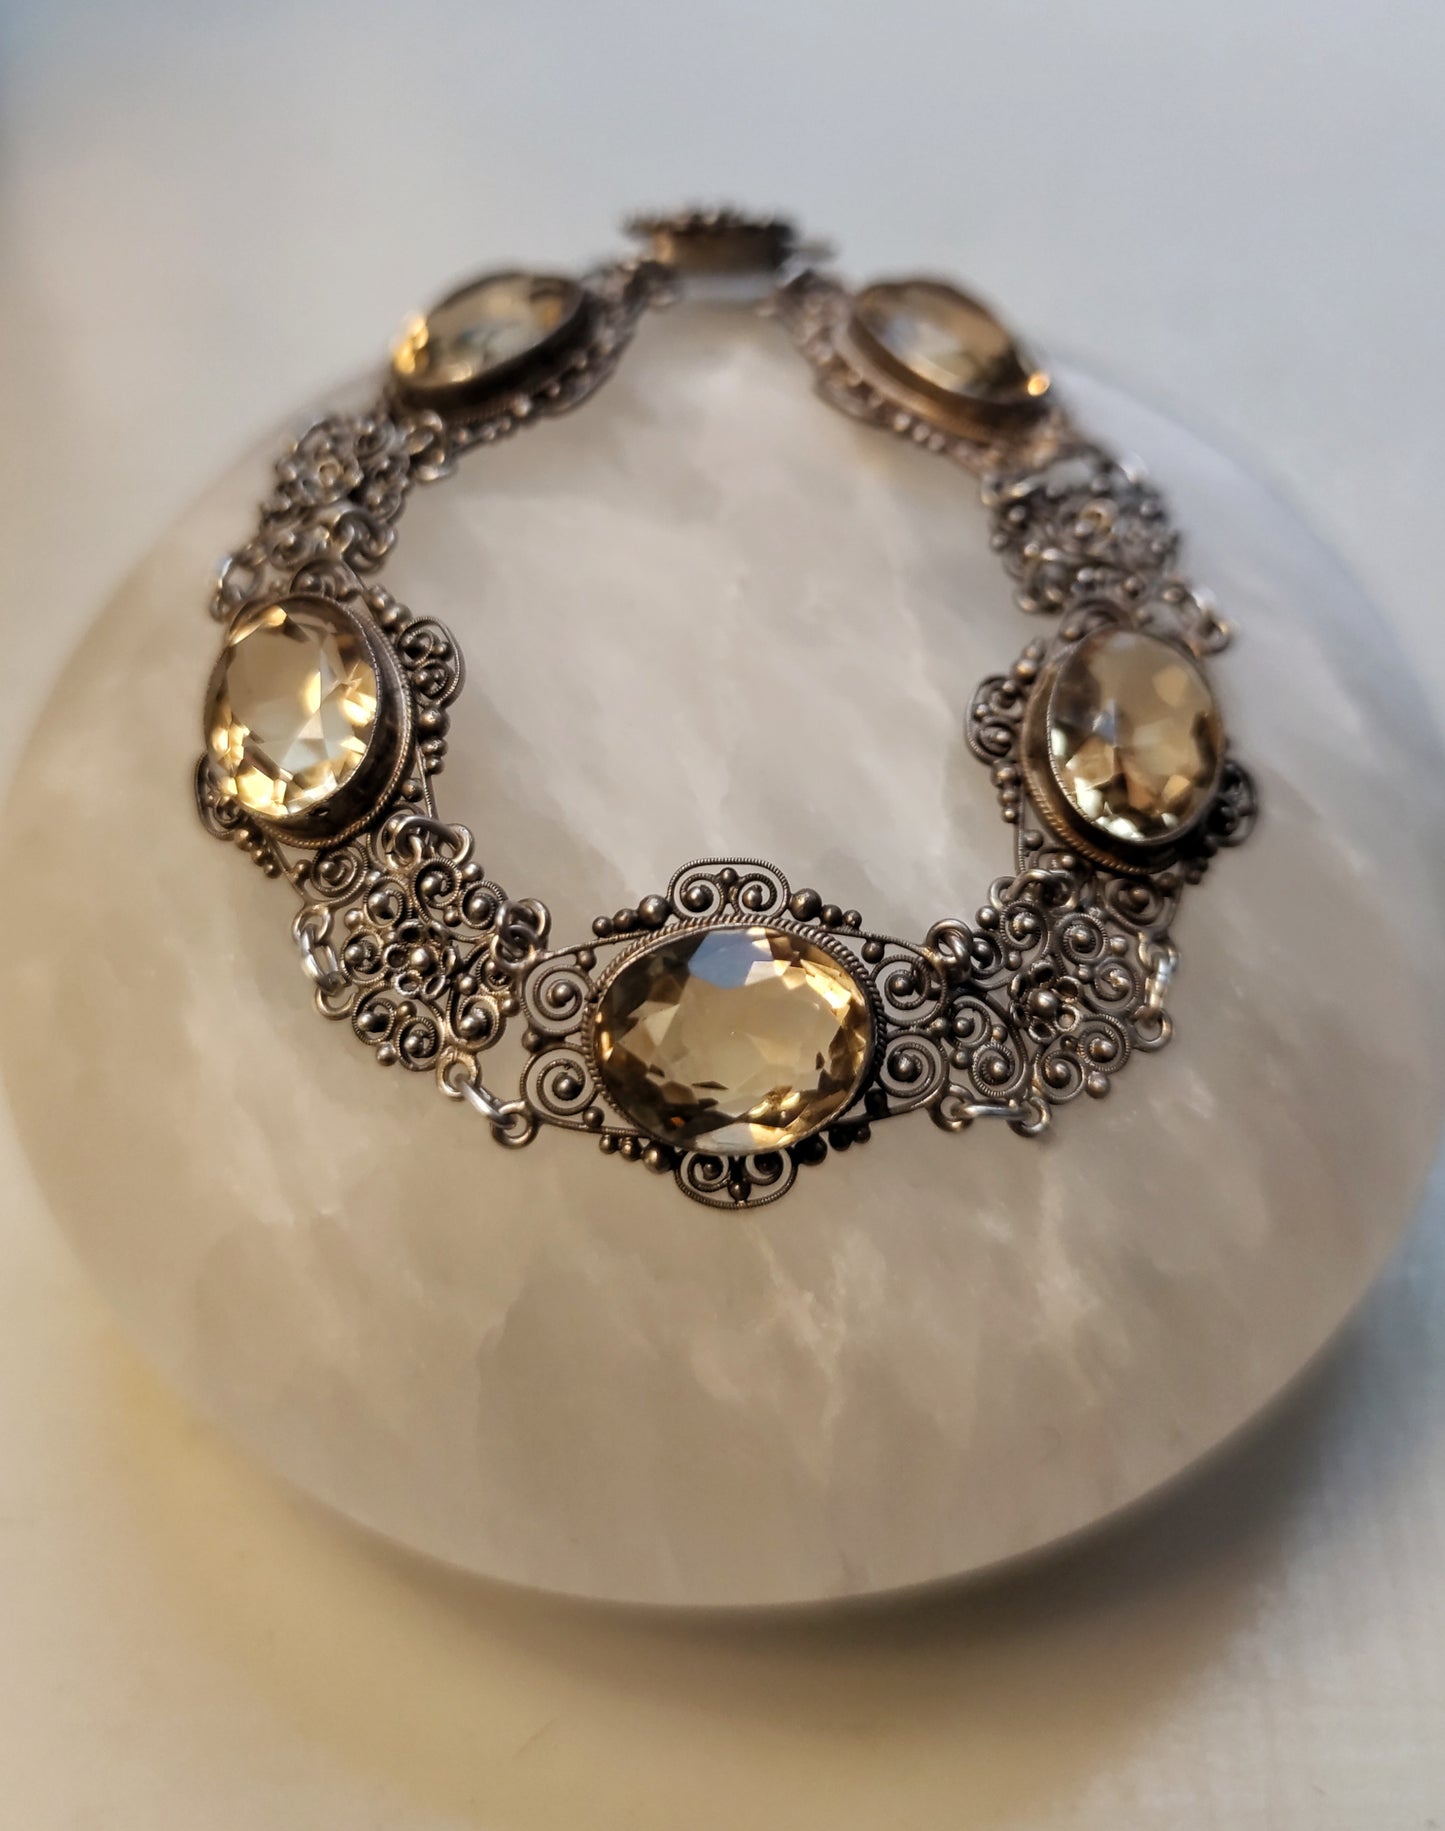 Filigree bracelet from Florence with citrines.